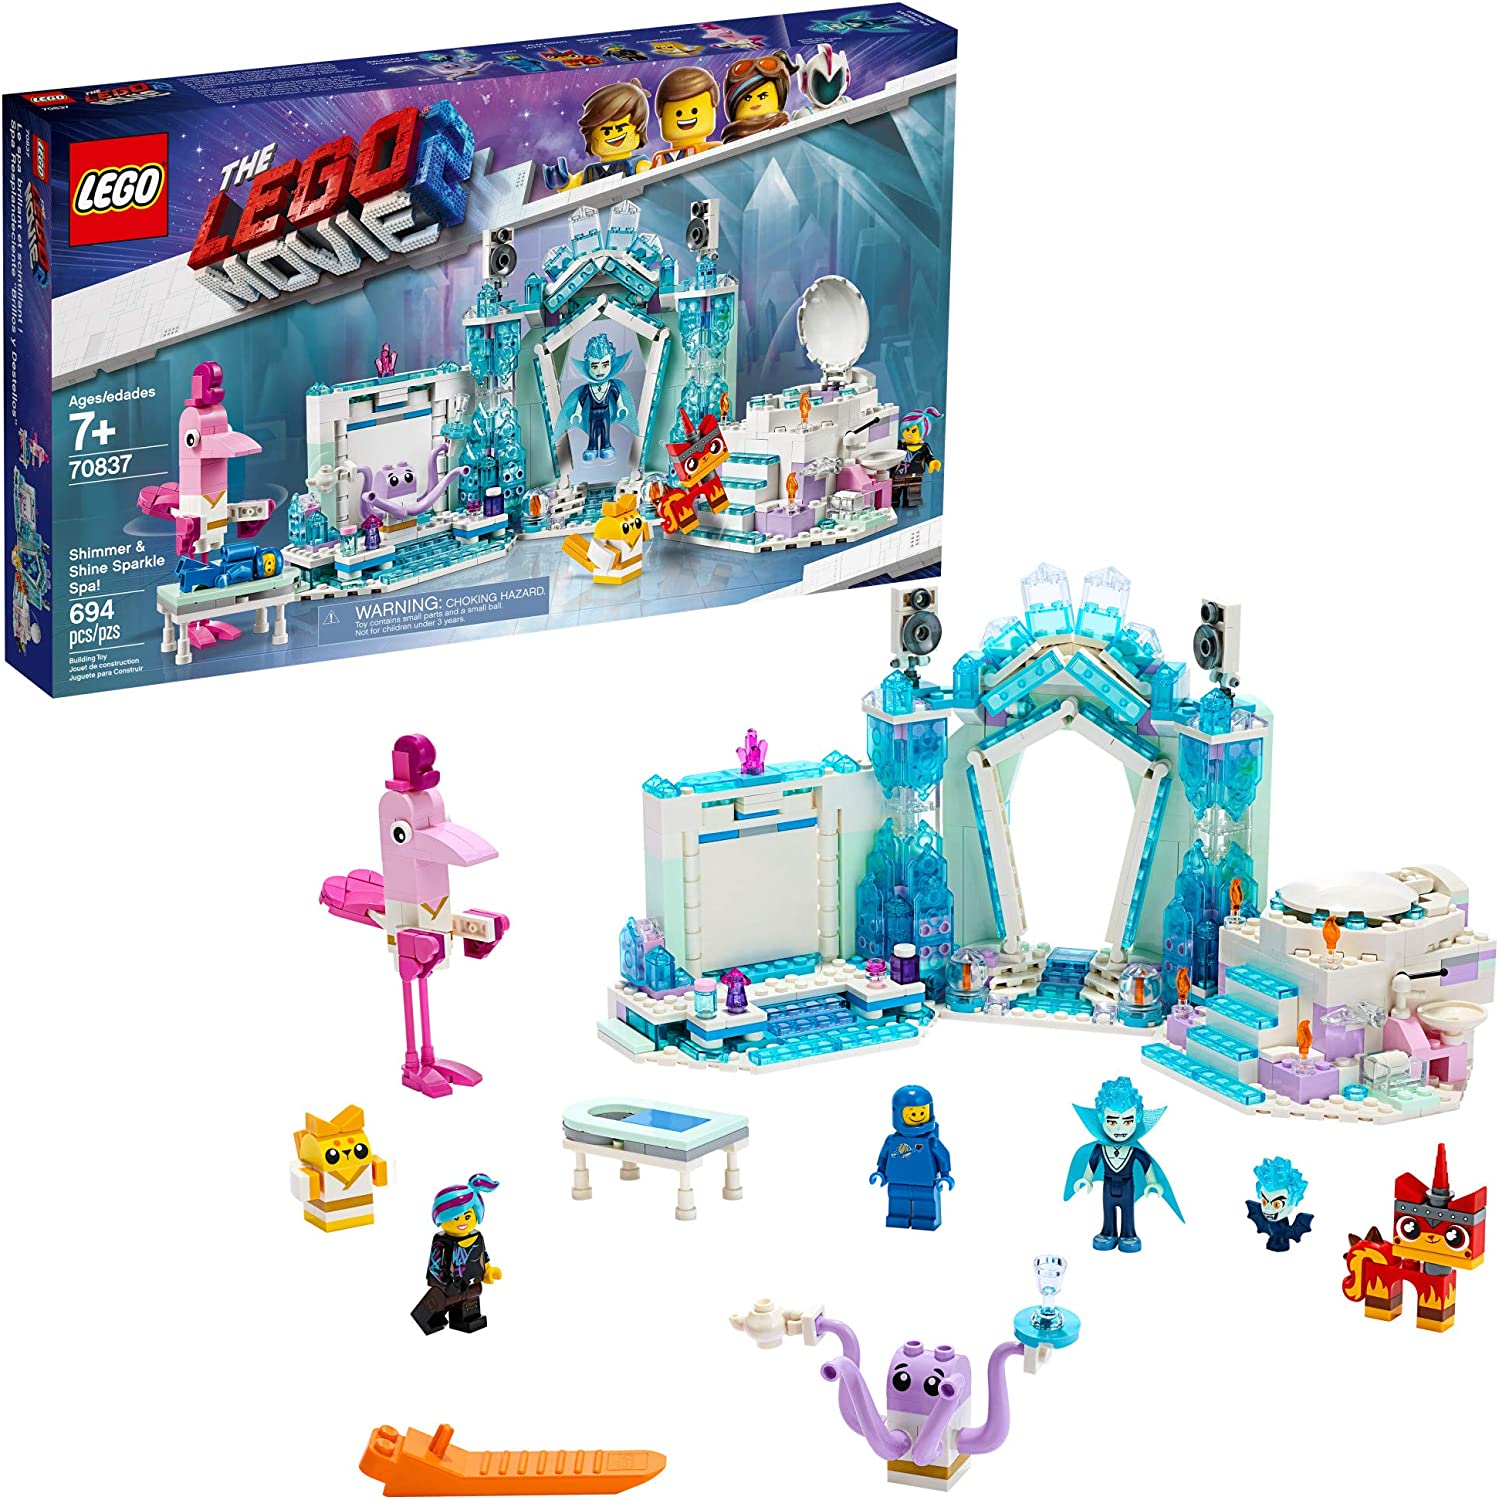 LEGO The Movie 2 Shimmer & Shine Sparkle Spa! 70837 Building Kit (691 Pieces)